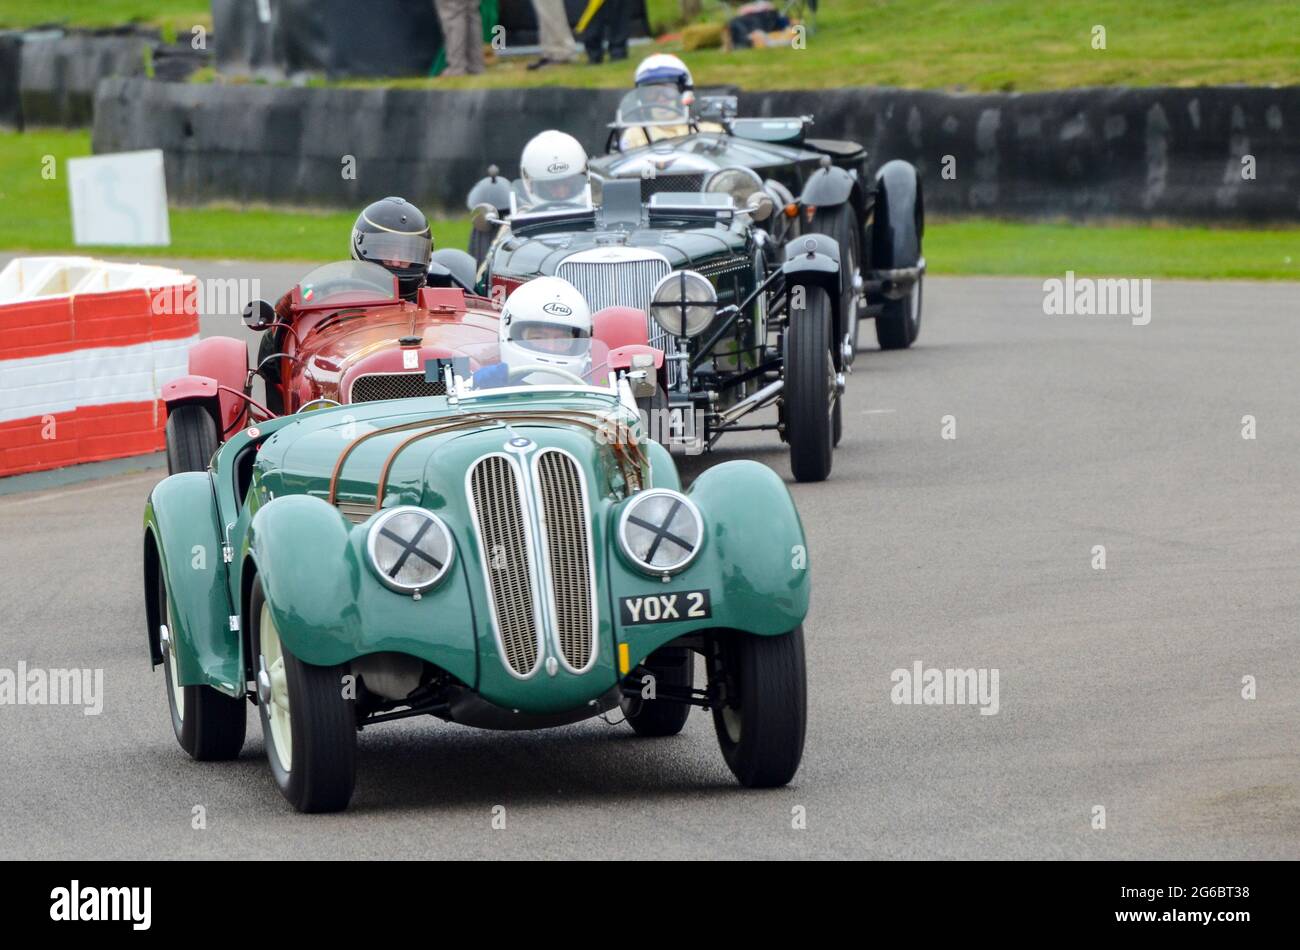 BMW 328 classic, vintage racing car competing in the Brooklands Trophy at the Goodwood Revival historic event, UK. Driven by David Cottingham Stock Photo